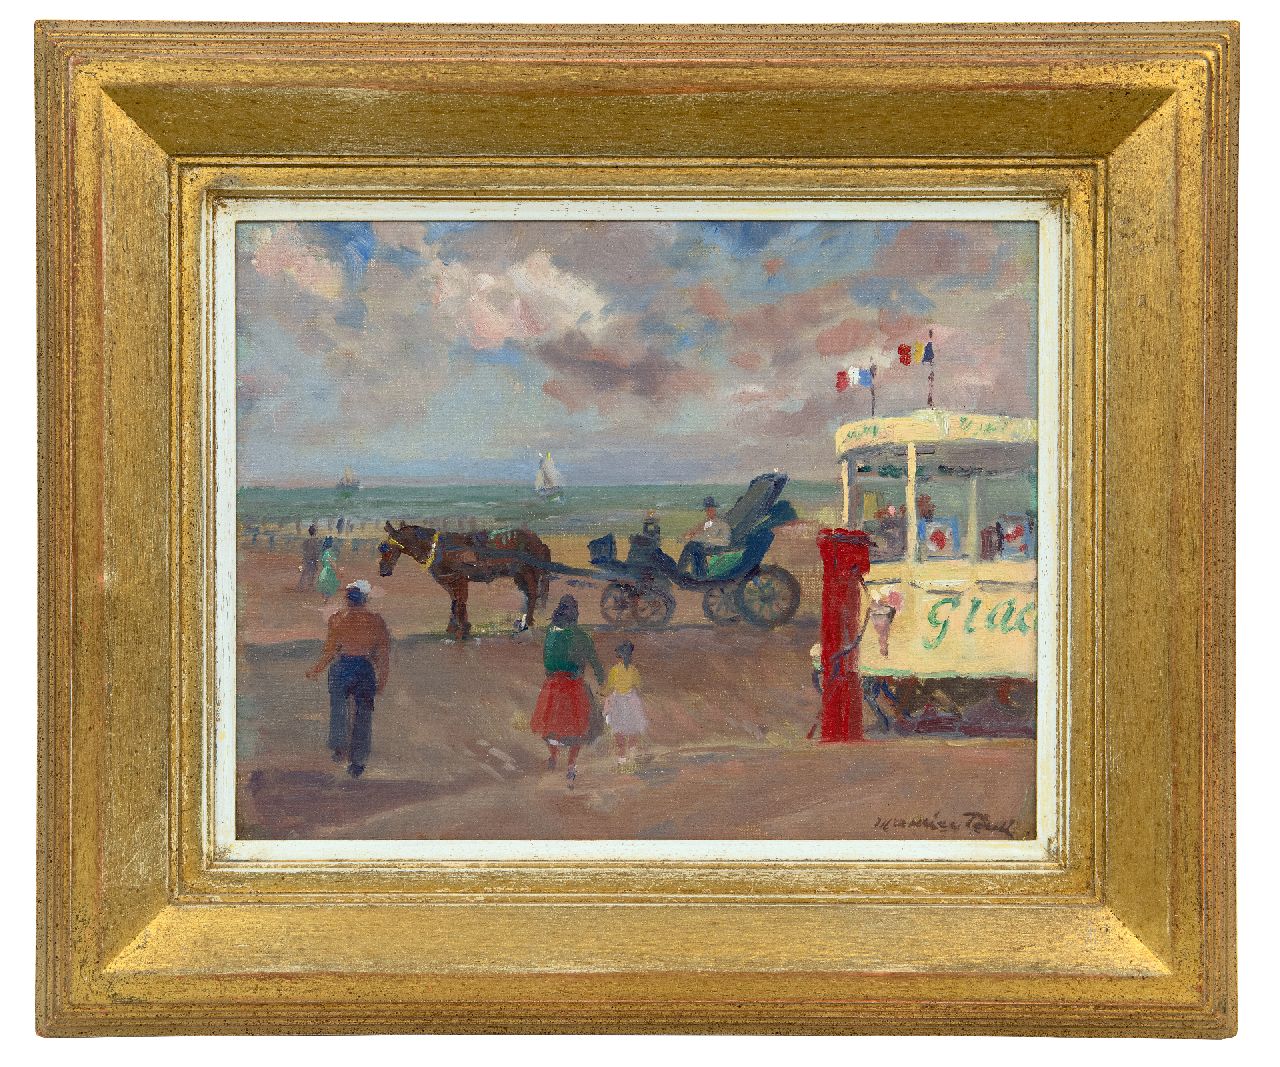 Paul M.  | Maurice Paul | Paintings offered for sale | Selling ice cream at the beach, oil on canvas laid down on board 28.2 x 36.1 cm, signed l.r.